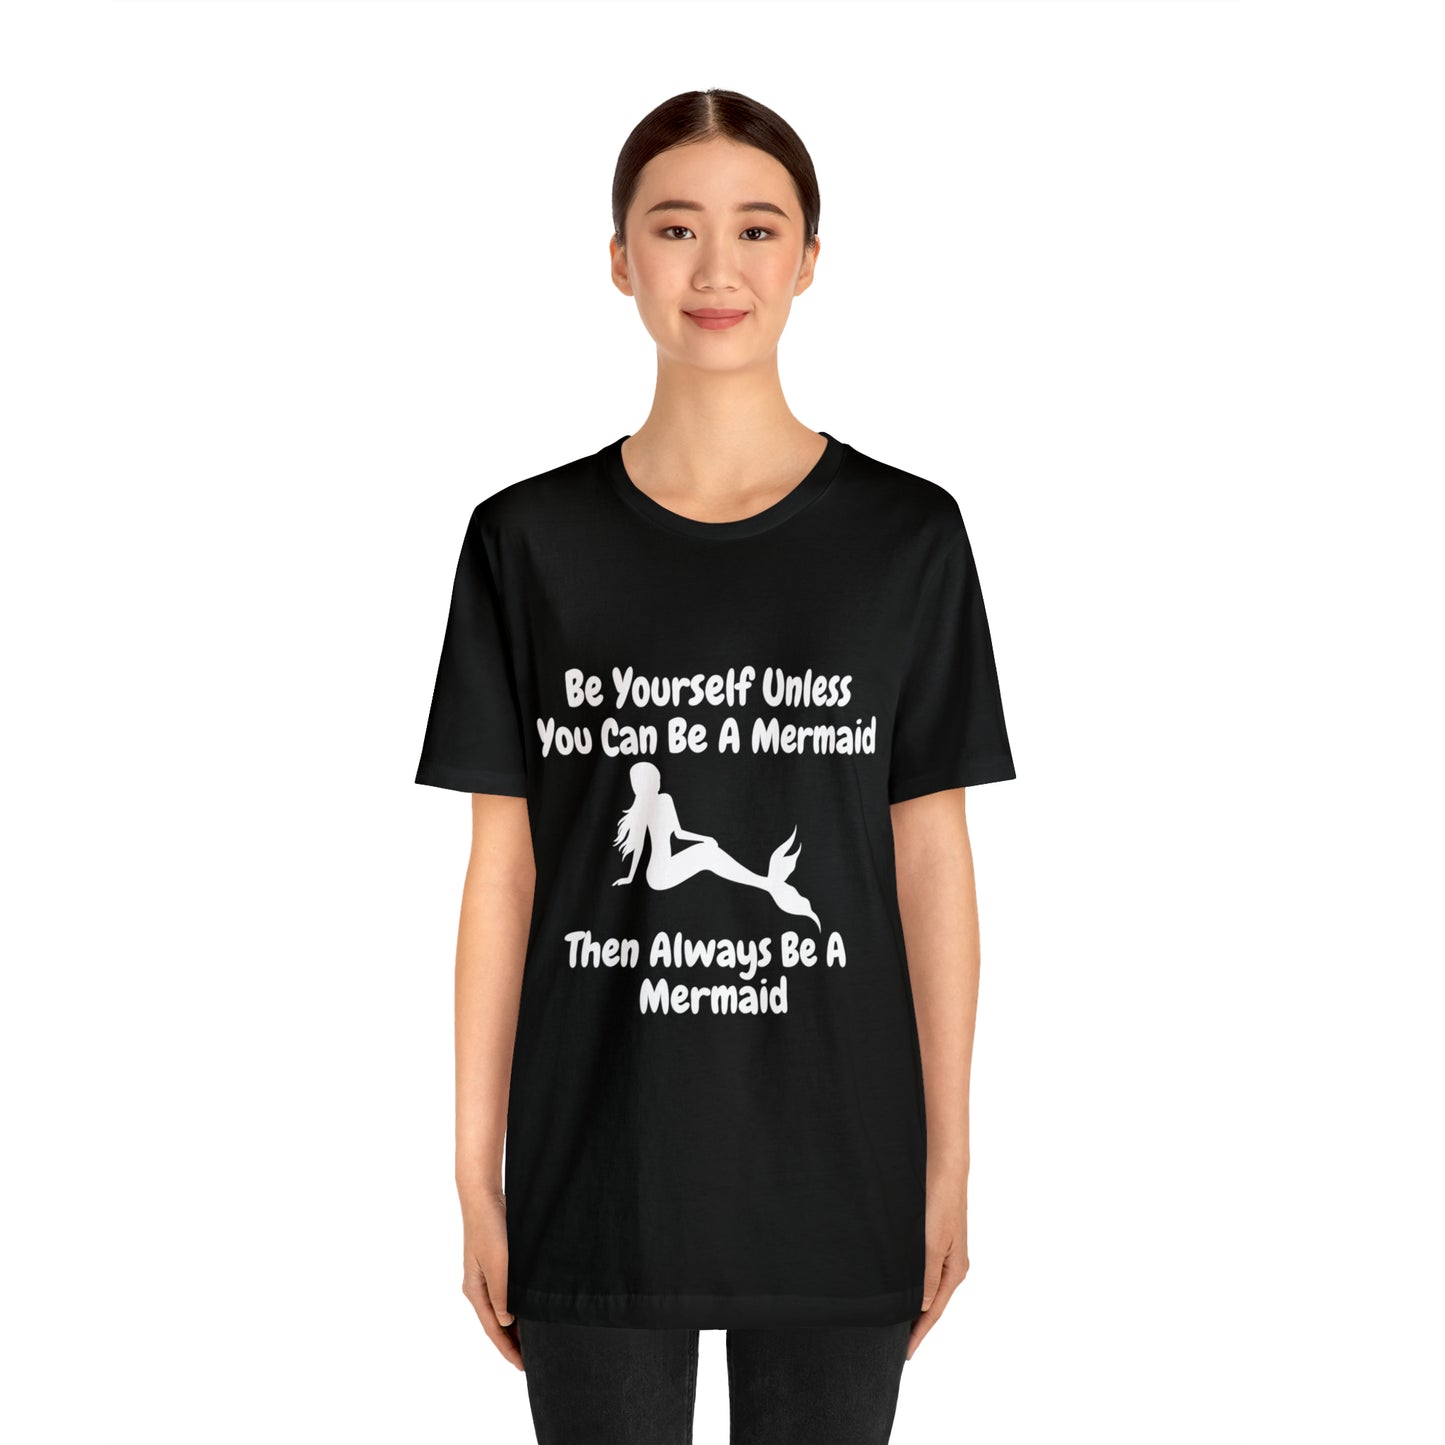 Be Yourself Unless You Can Be A Mermaid T-Shirt